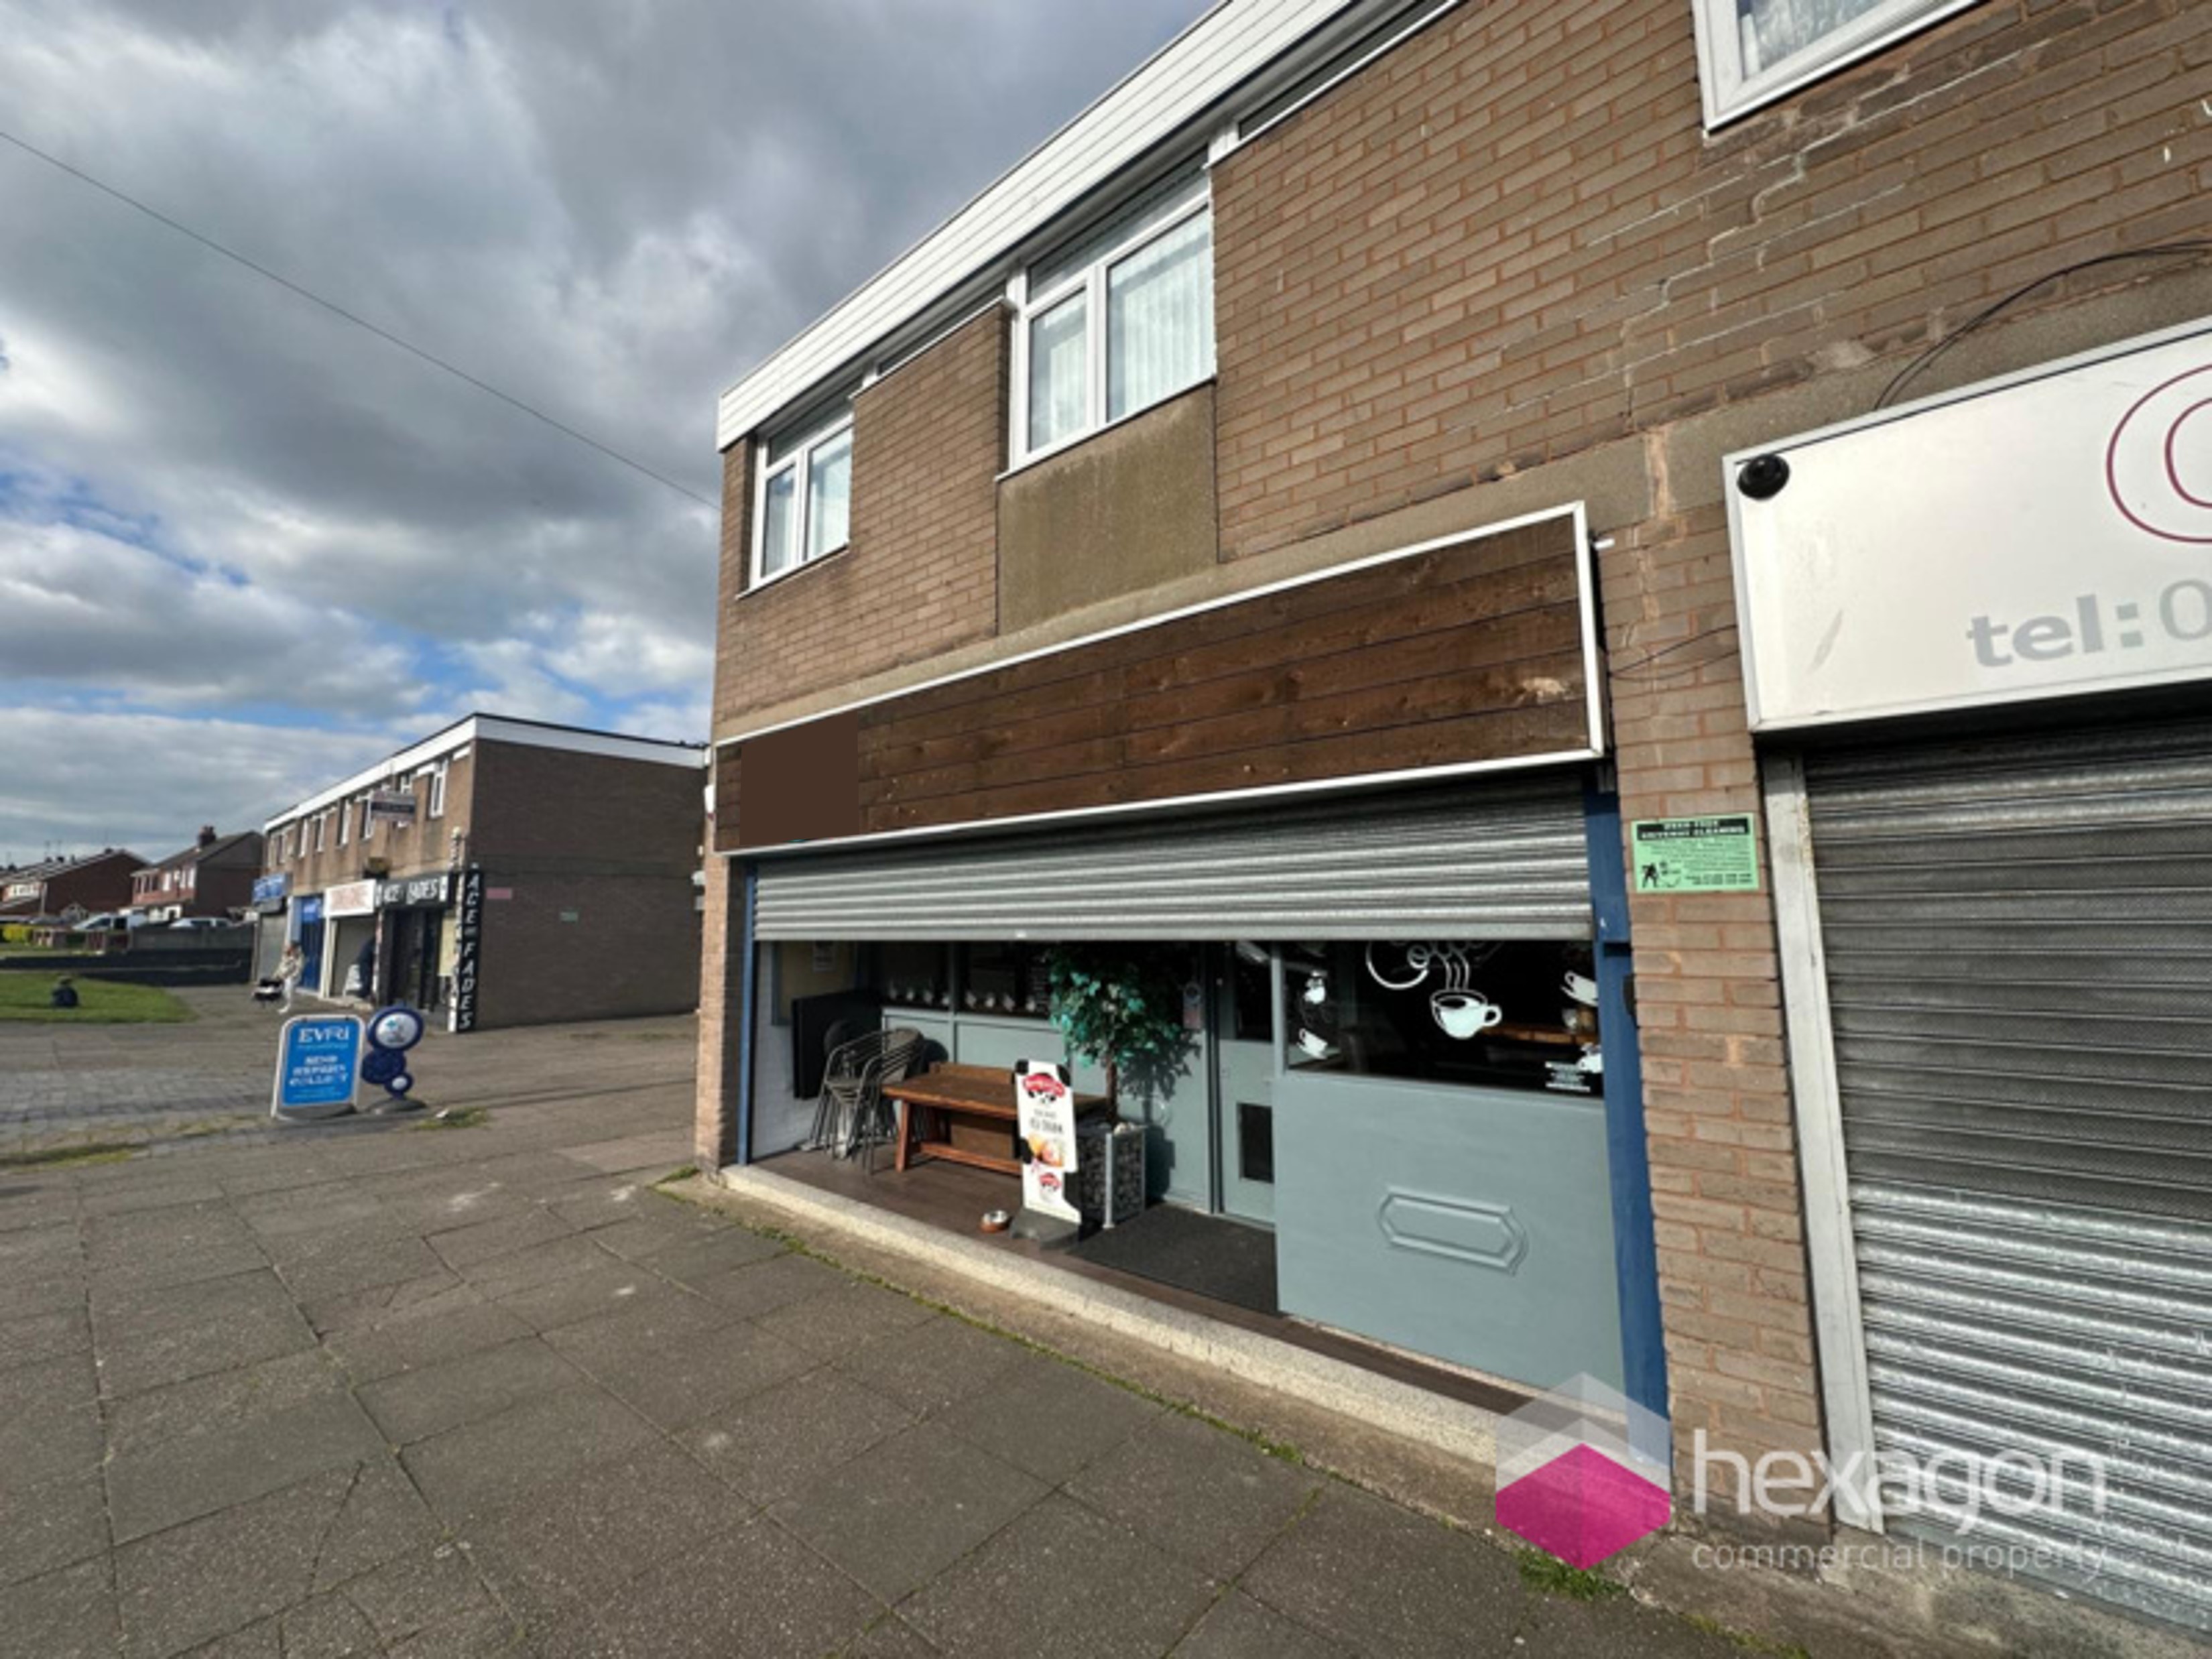 0 bed Retail Property (High Street) for rent in Kingswinford. From Hexagon Commercial Property